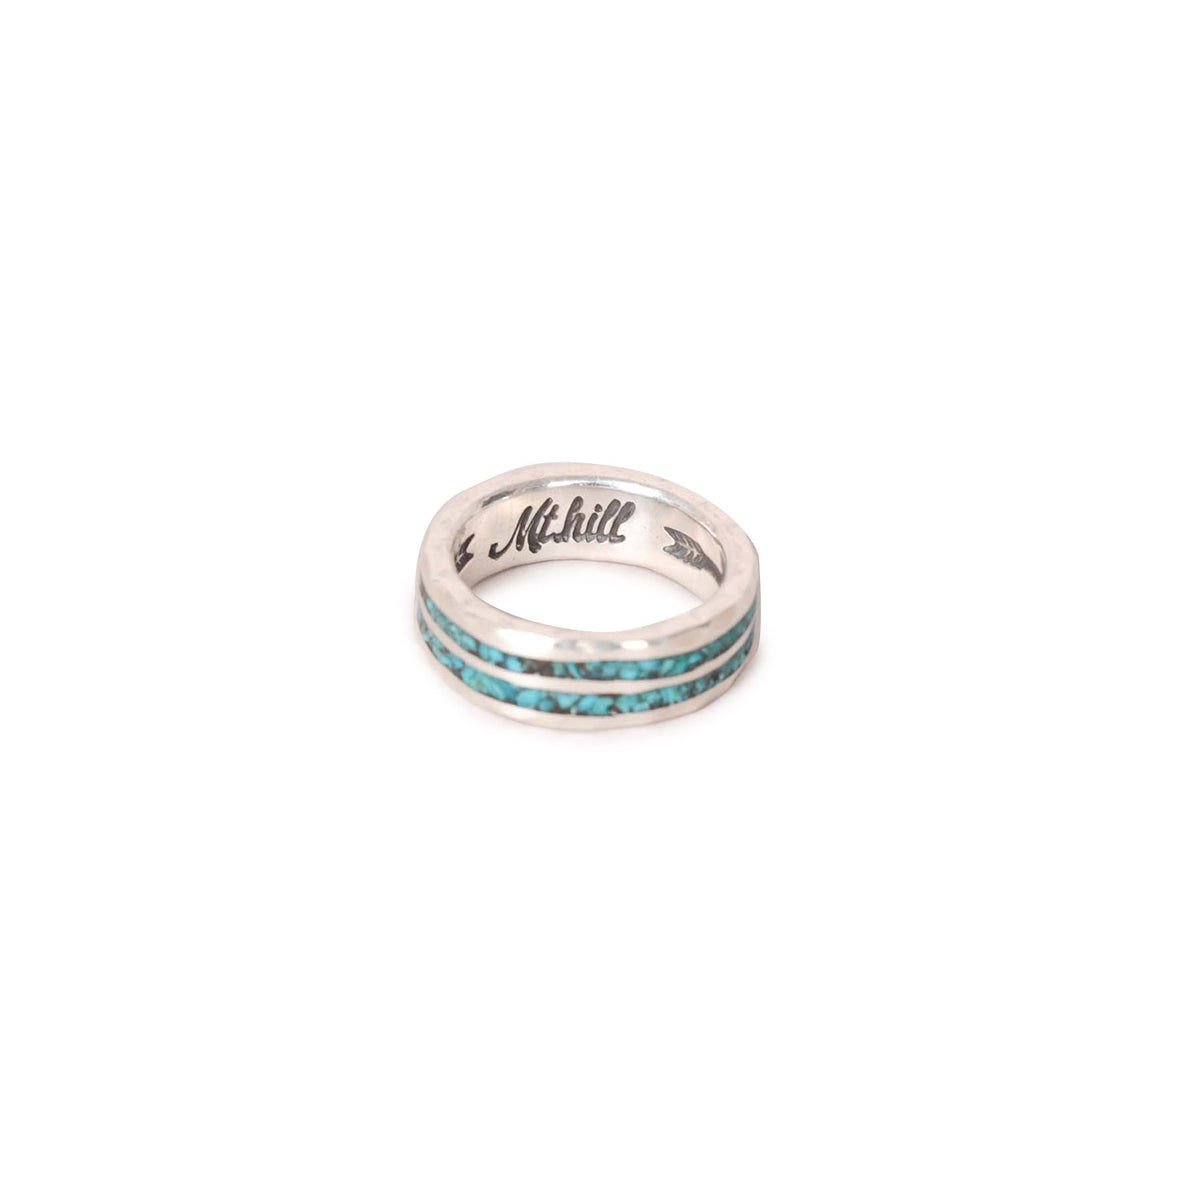 Mt.hill Turquoise Chip Inlay Ring Narrow - リング